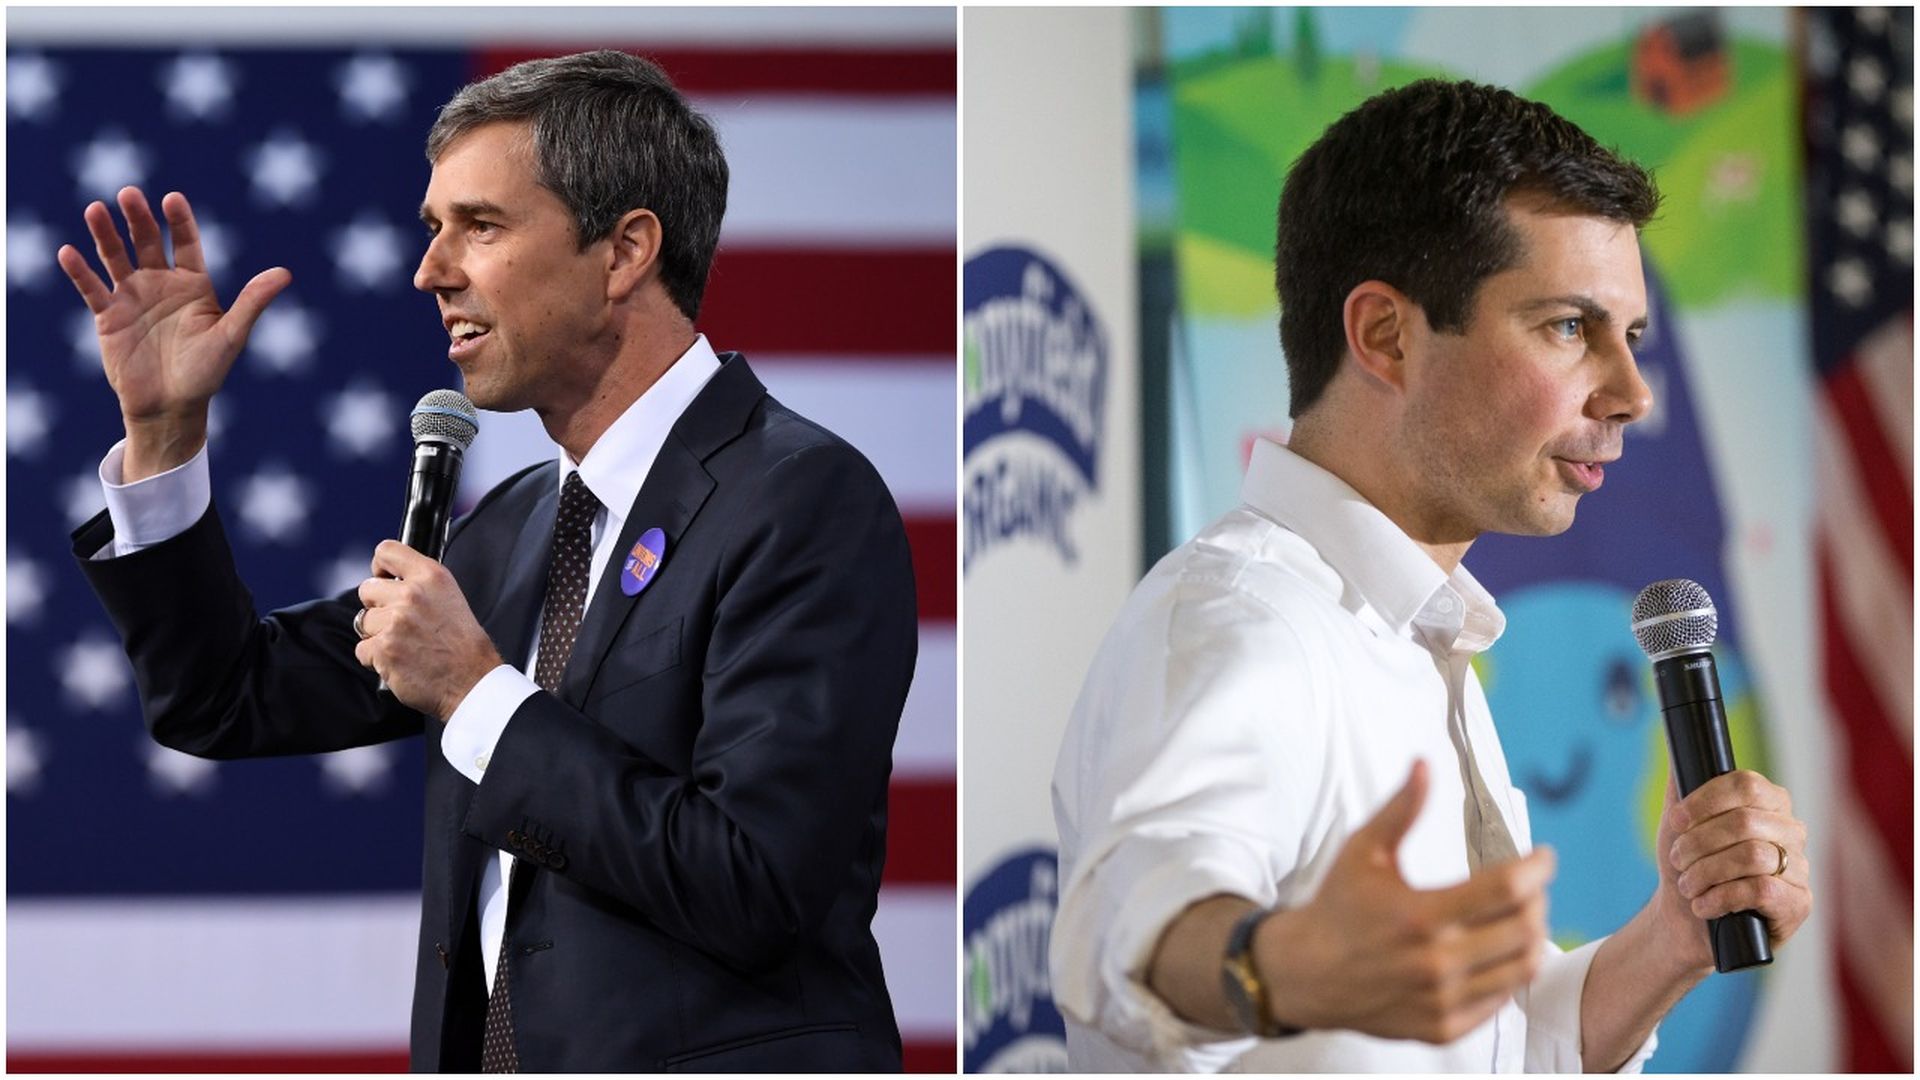 This image is a split screen of Beto and Buttigieg, who are both facing away from each other and speaking into microphones.